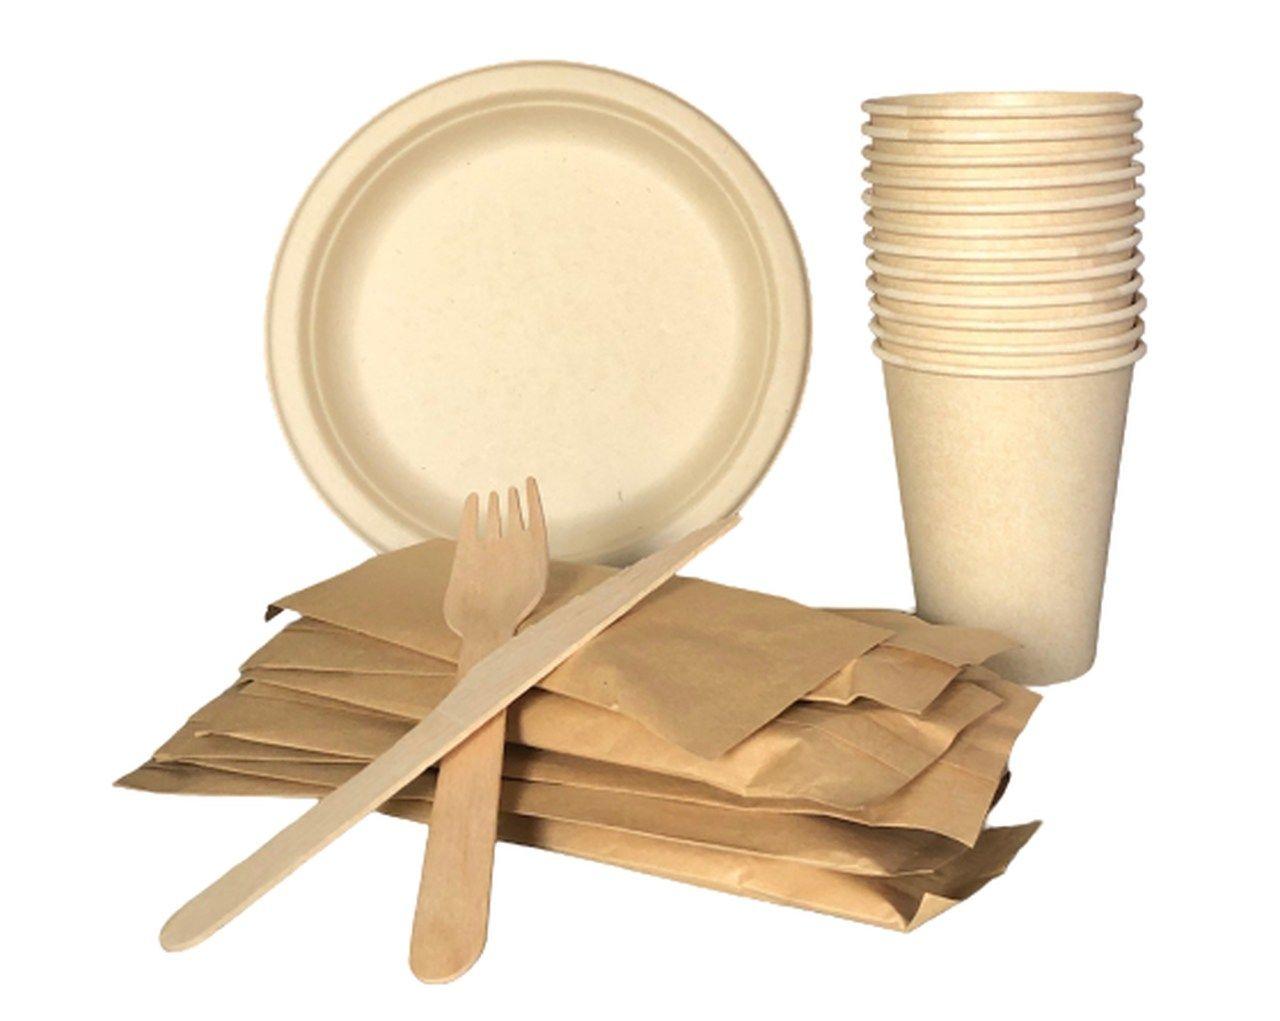 A set of disposable dishes for 12 people made of sugar cane